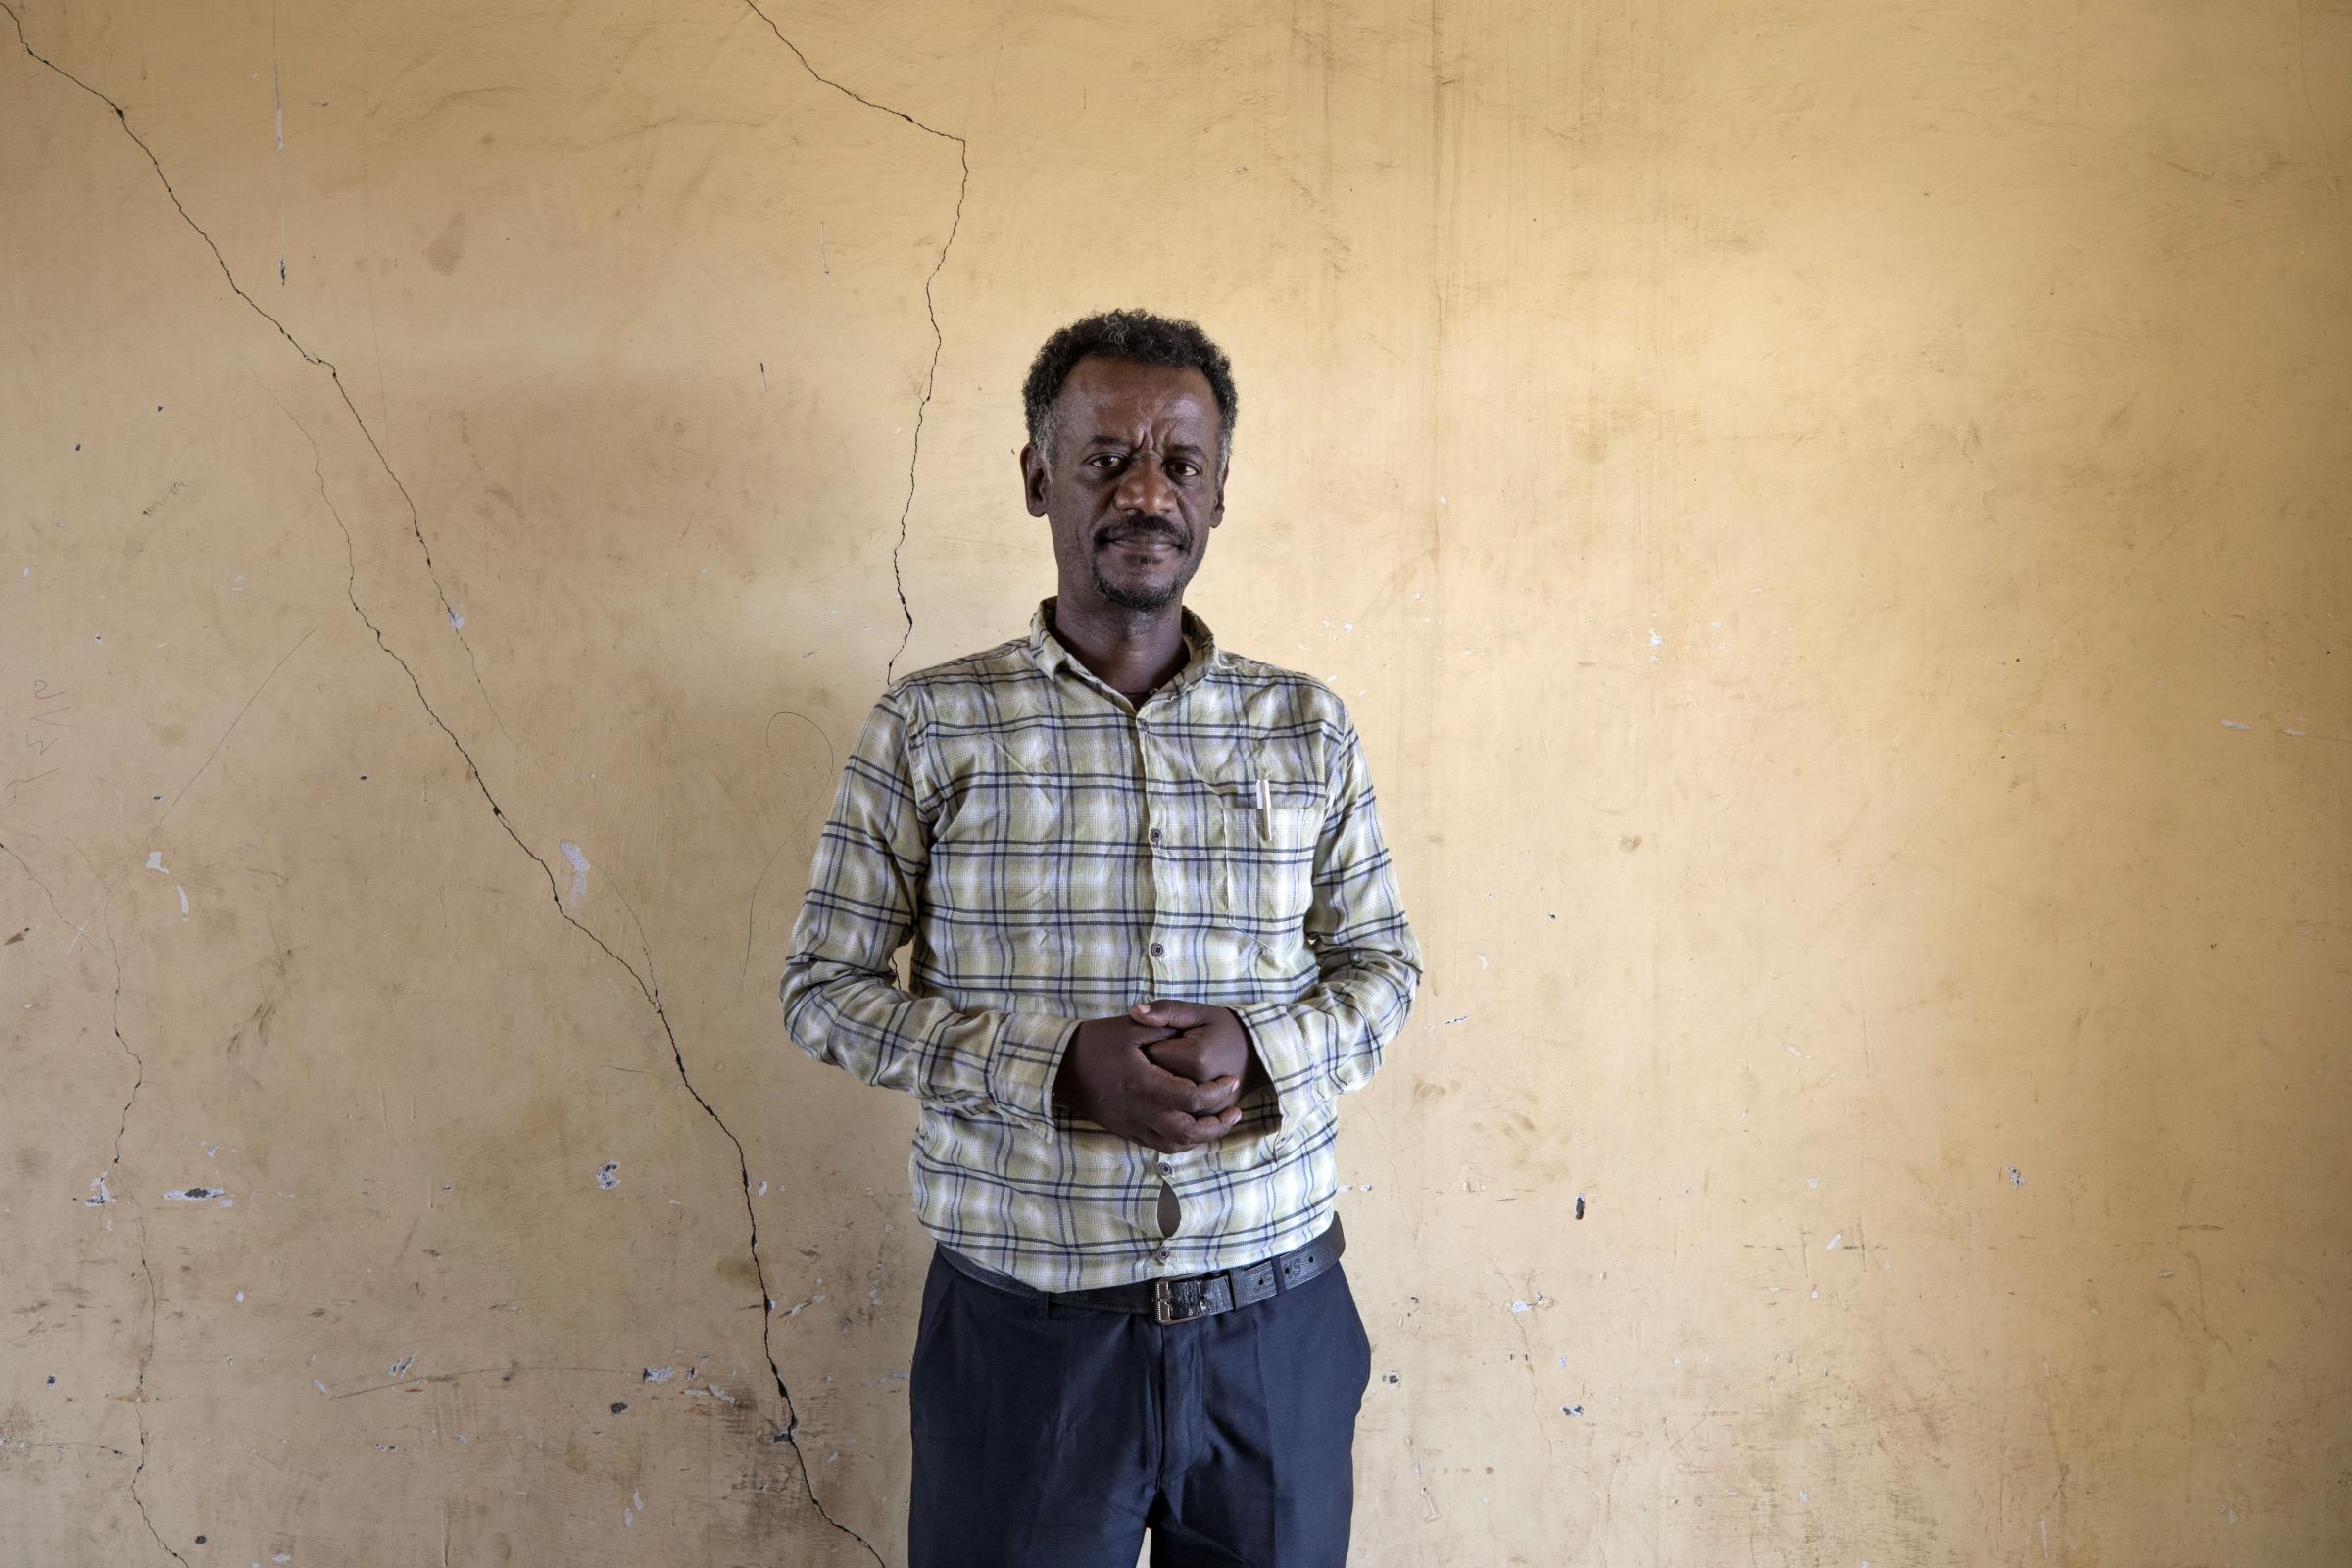 Refugee doctor chronicles Tigray's pain - Dr. Tewodros Tefera on Dec. 15, 2020.